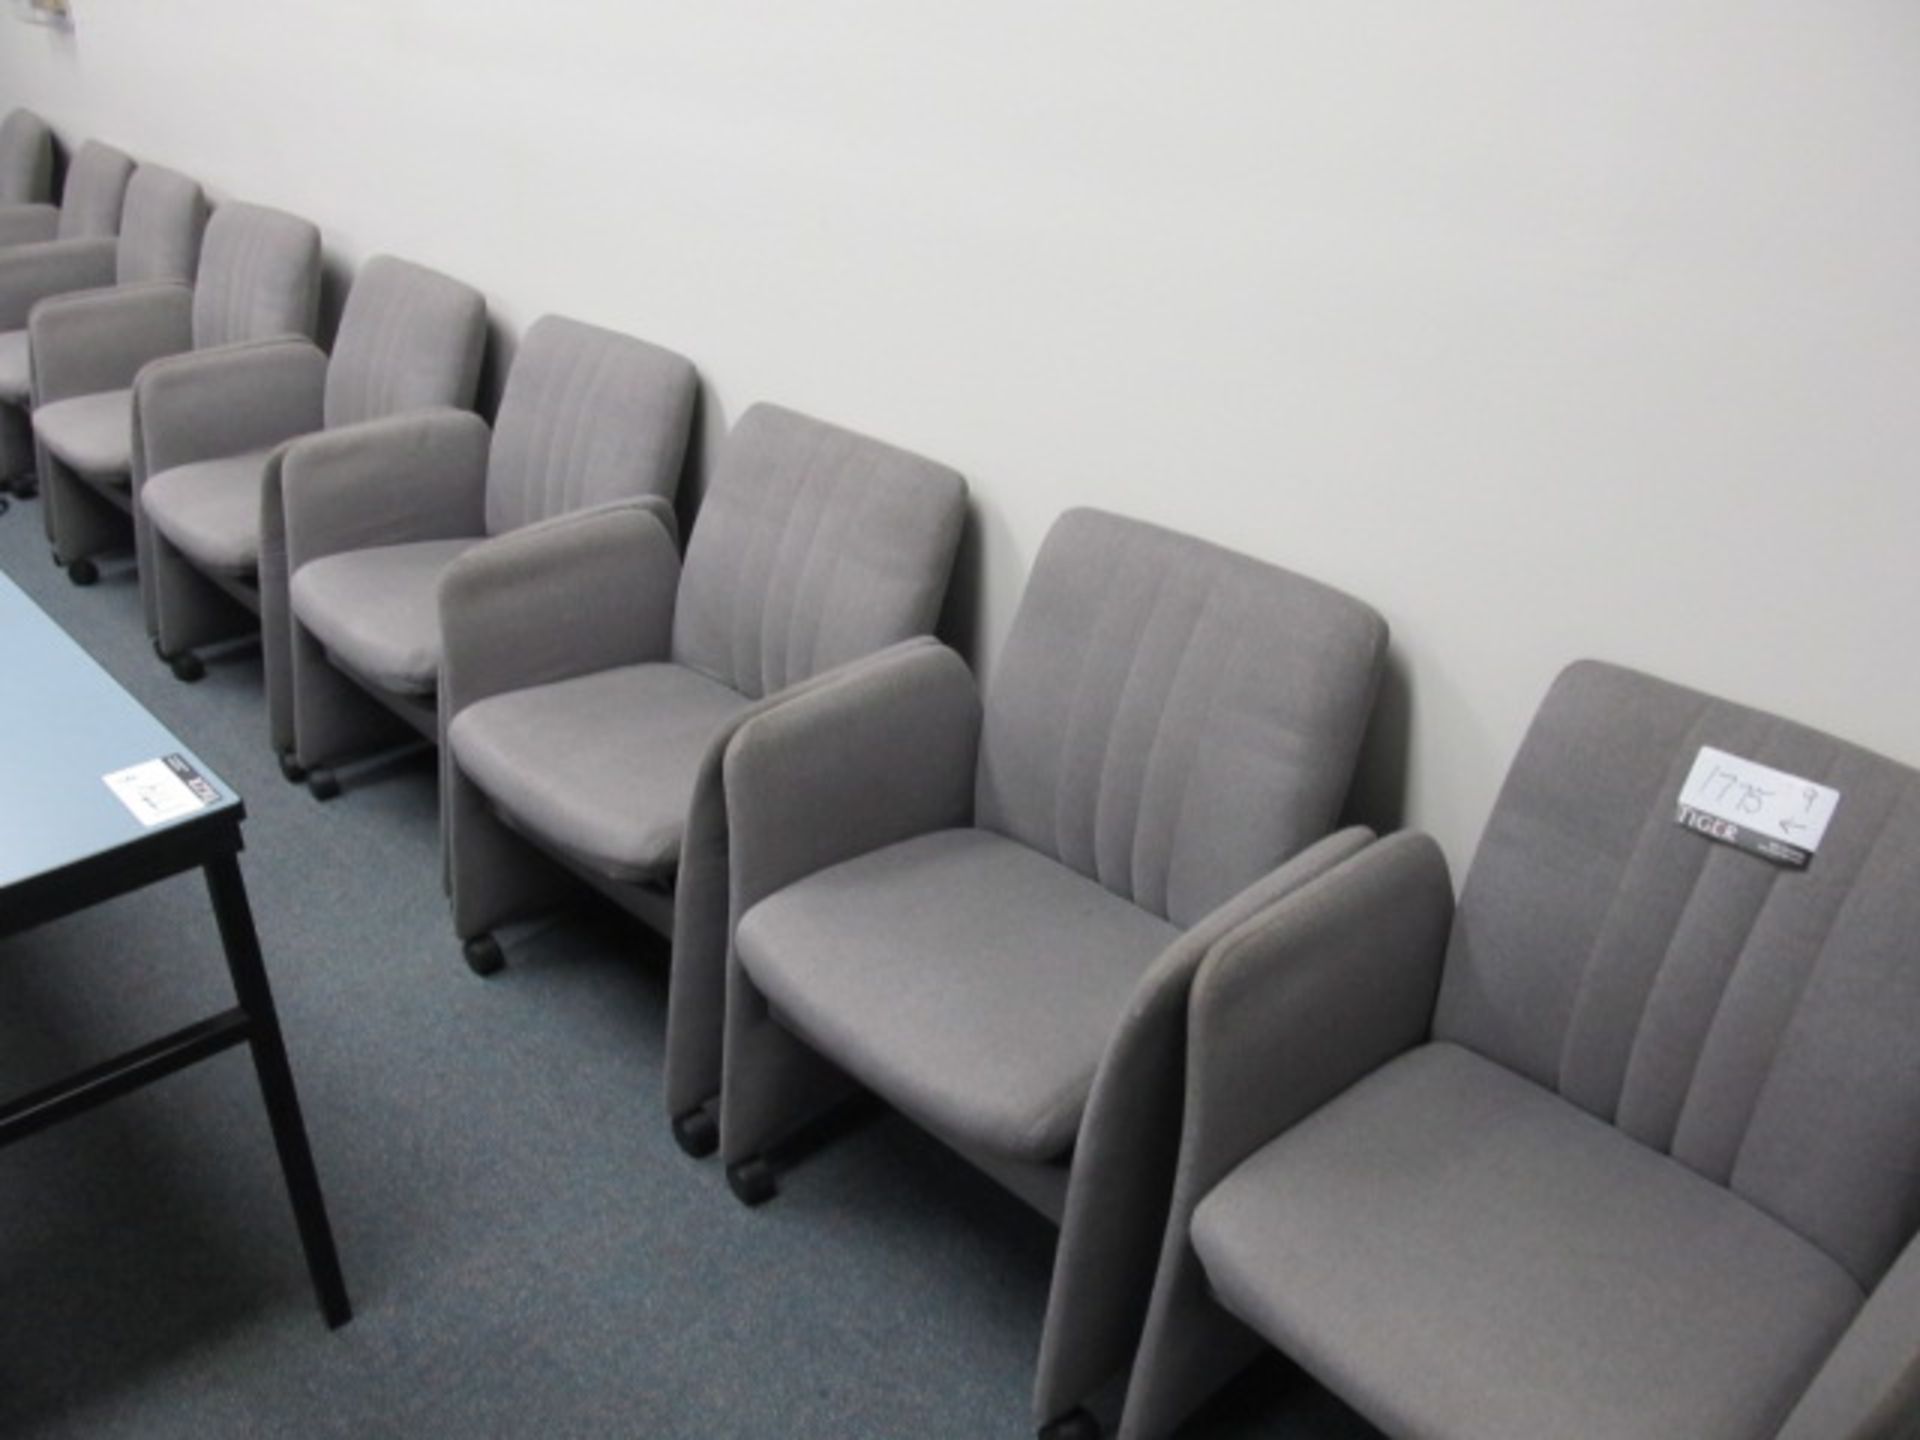 Rolling Arm Chairs Asset Location: Front Offices, Site Location: Mira Loma, CA